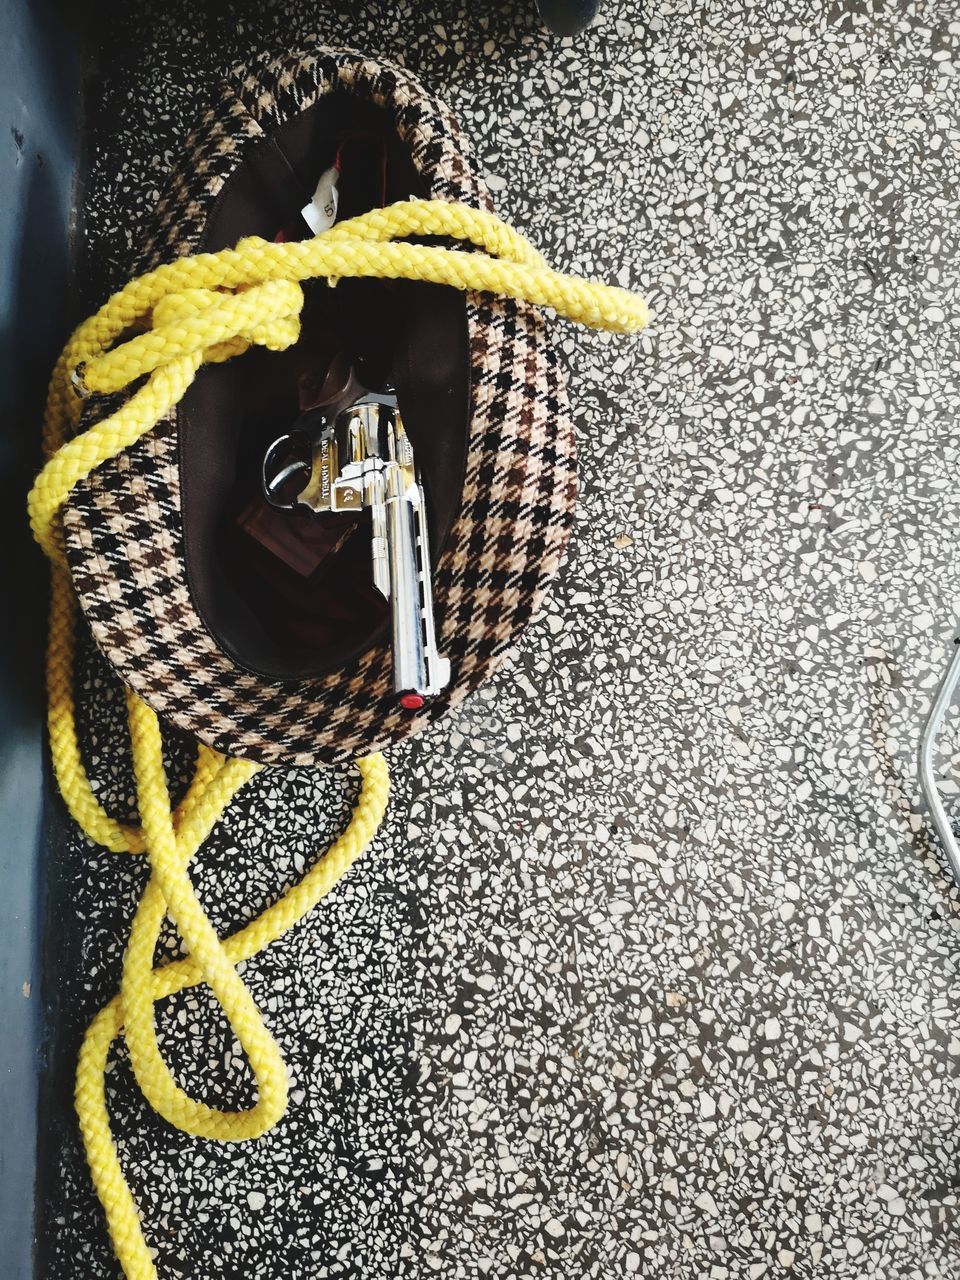 HIGH ANGLE VIEW OF SHOES TIED UP ON ROPE